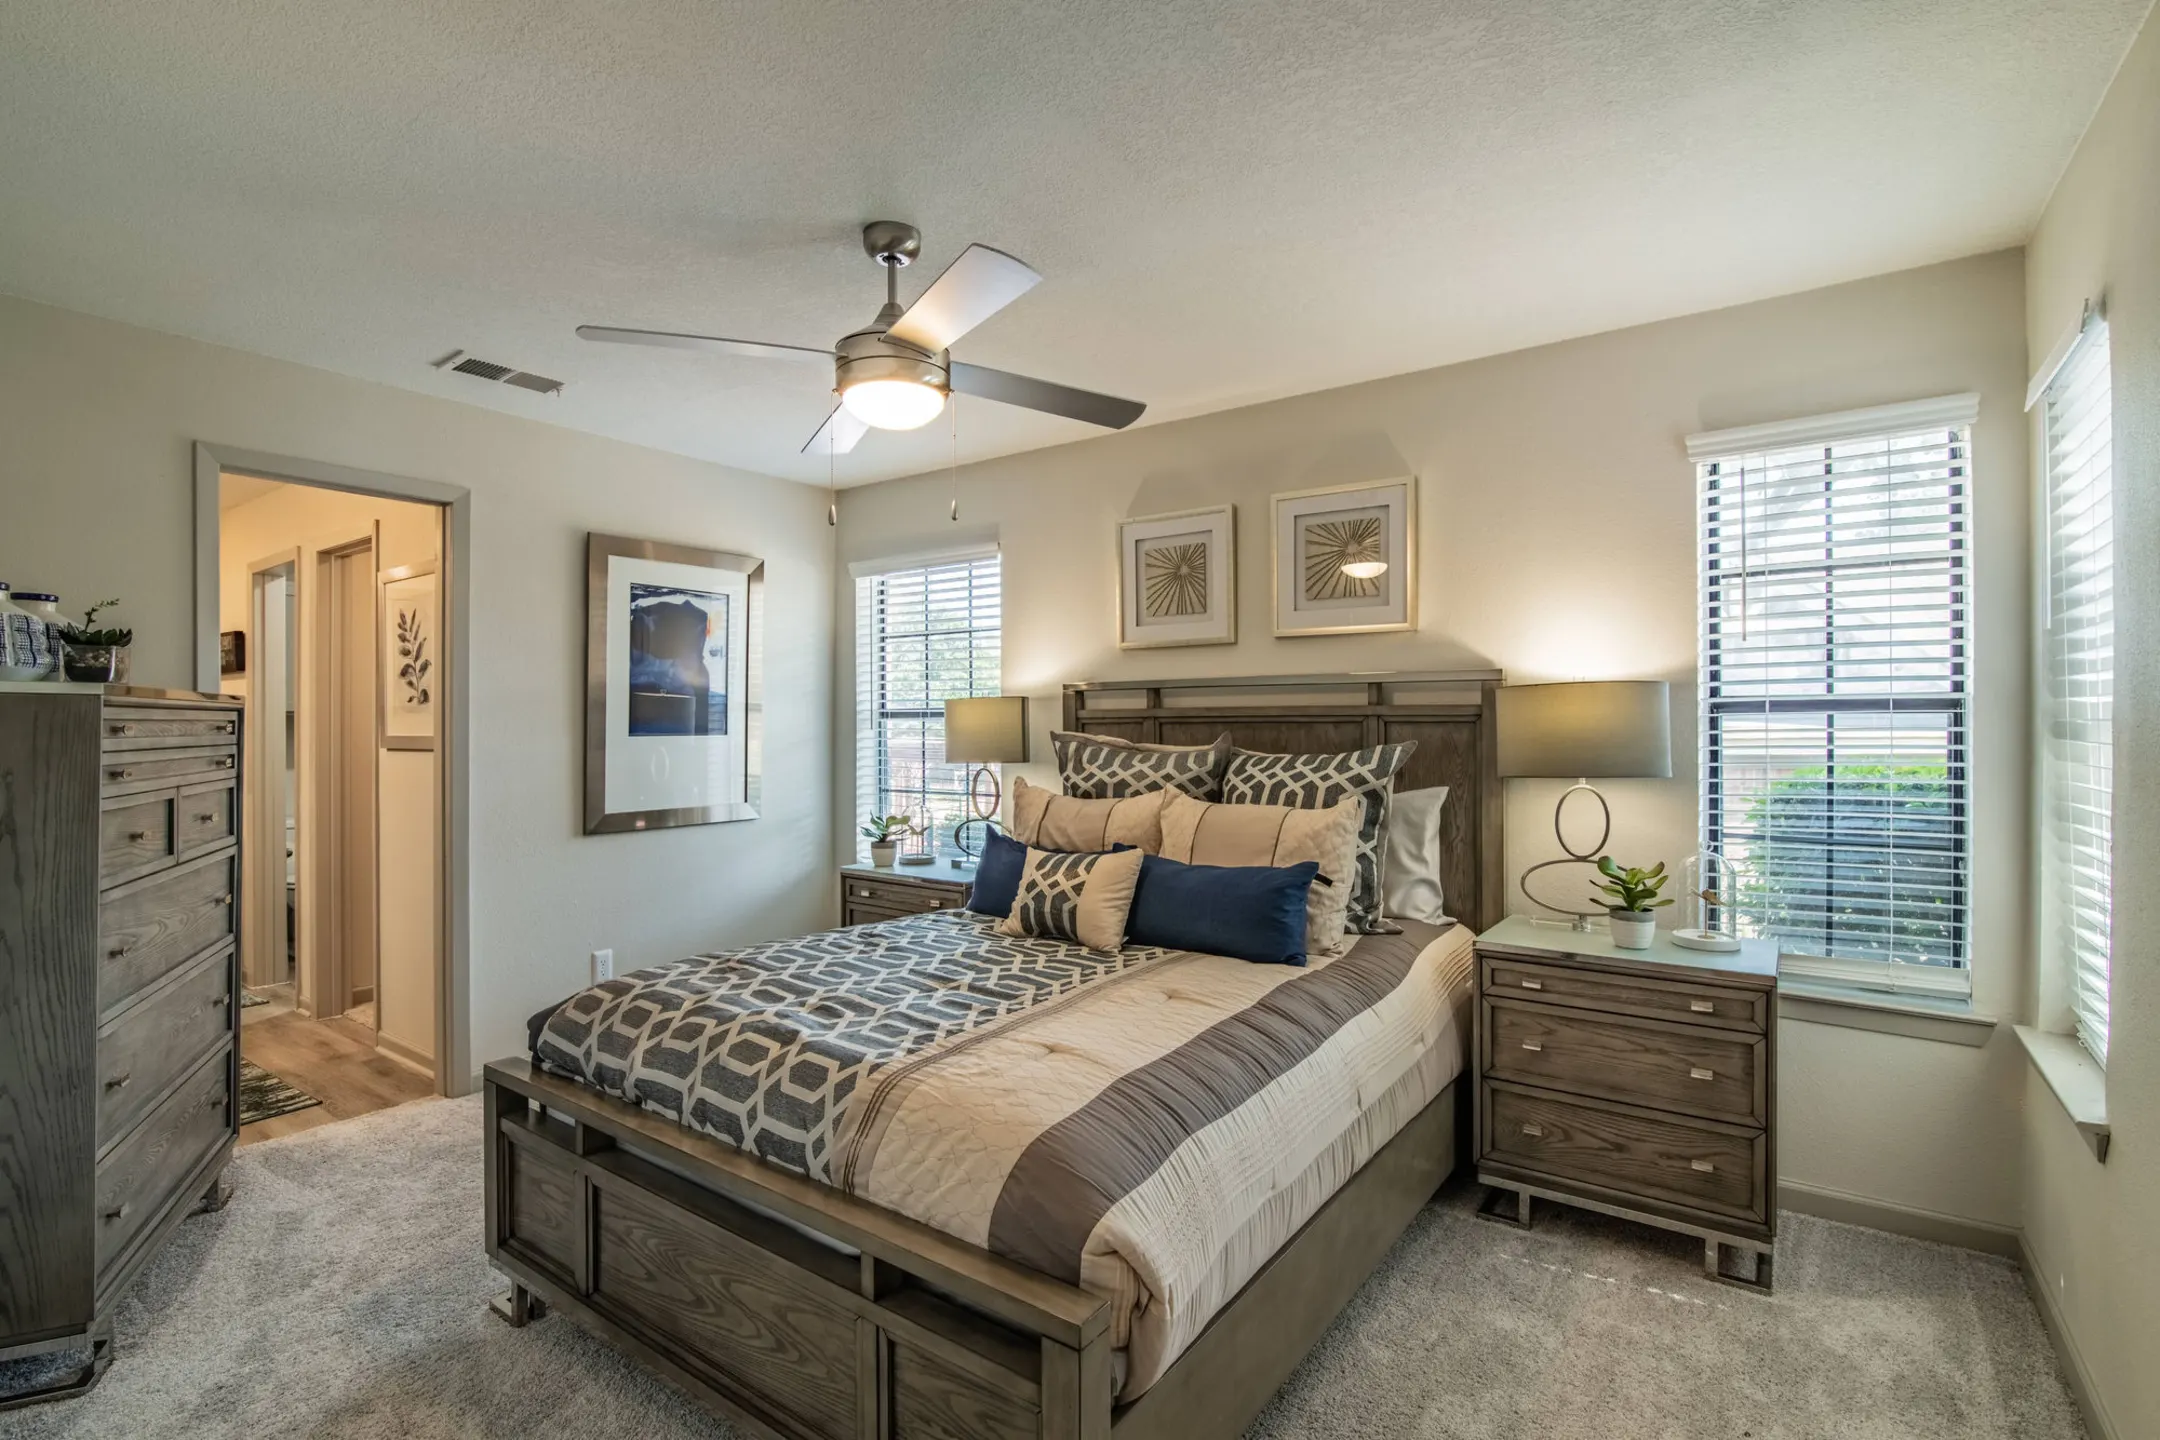 Bedroom - The Overlook At Bear Creek - Euless, TX